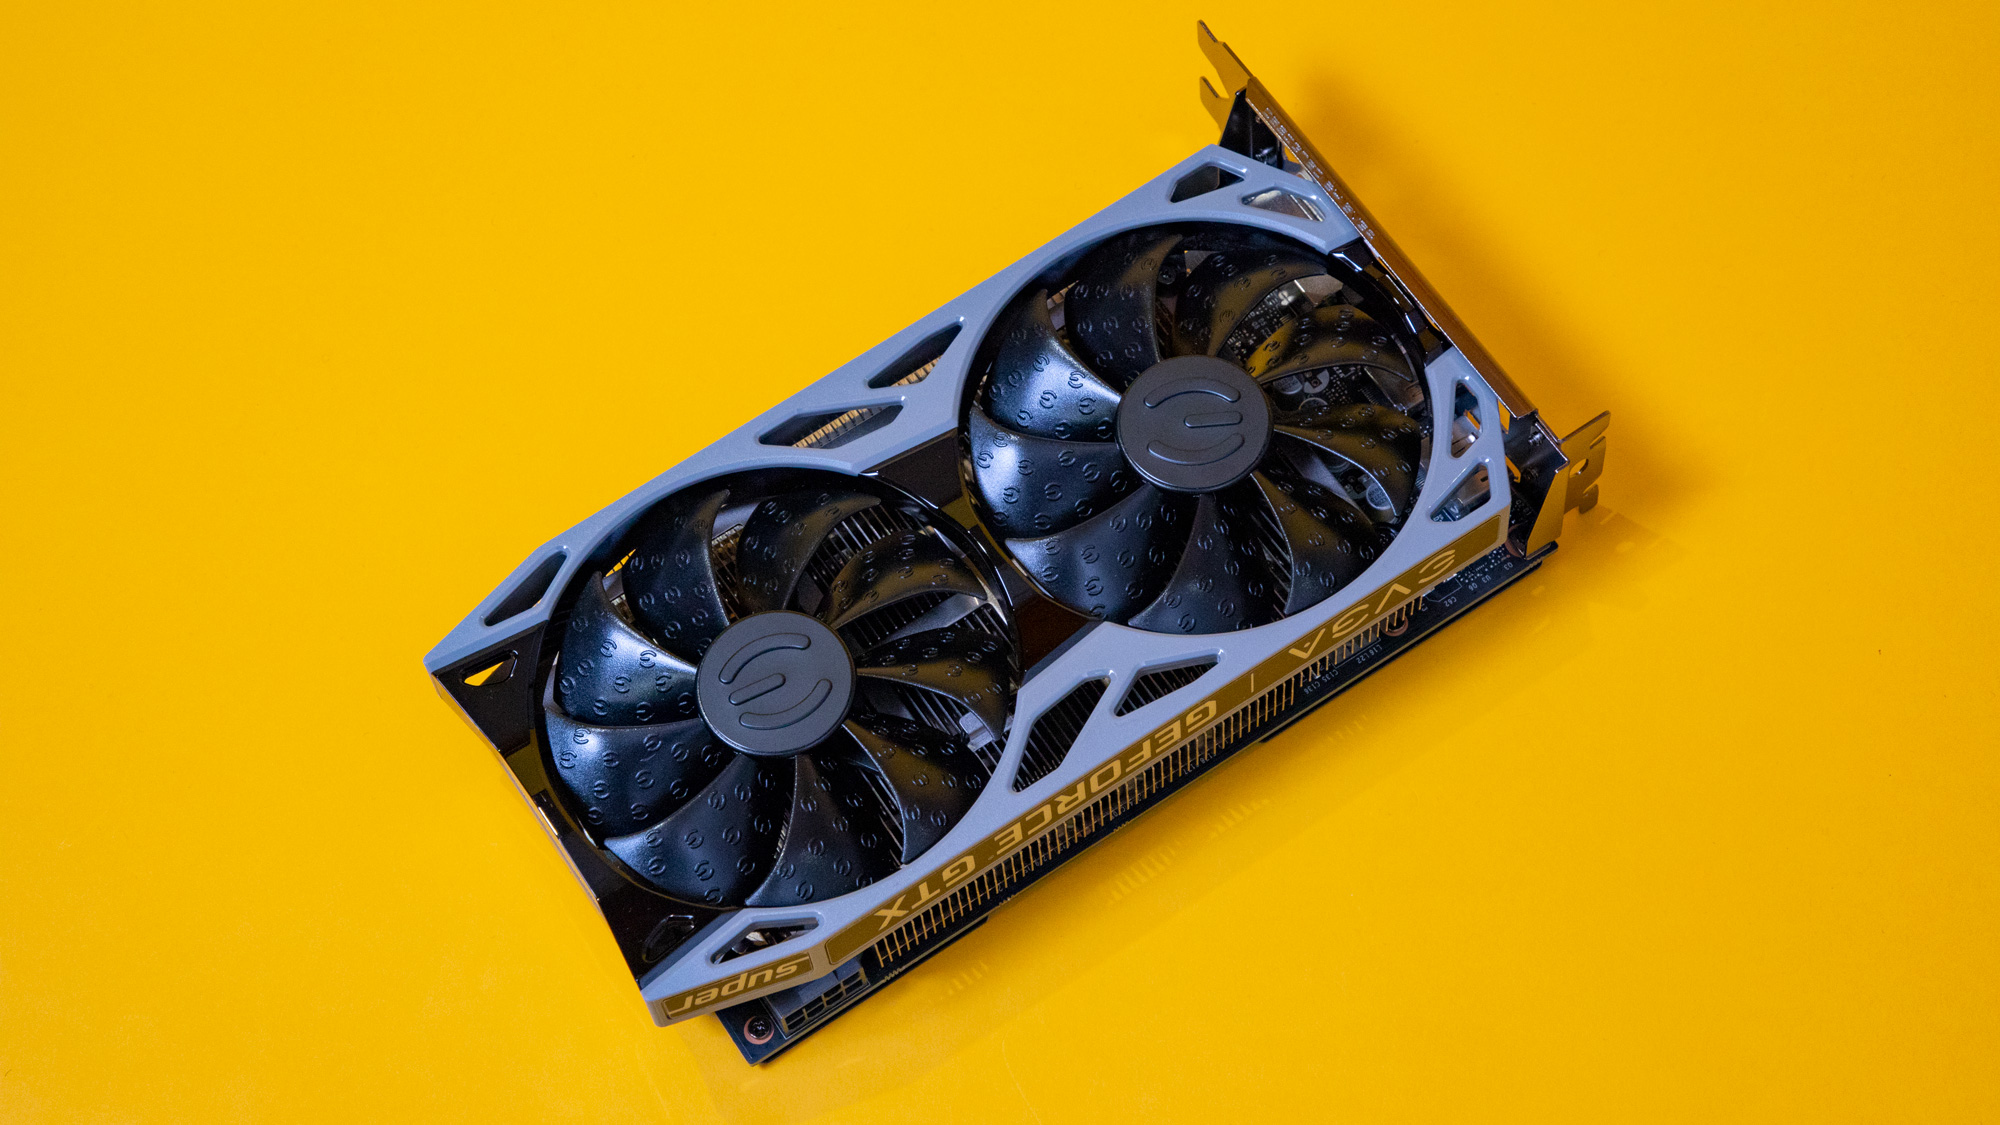 graphics card on an orange background